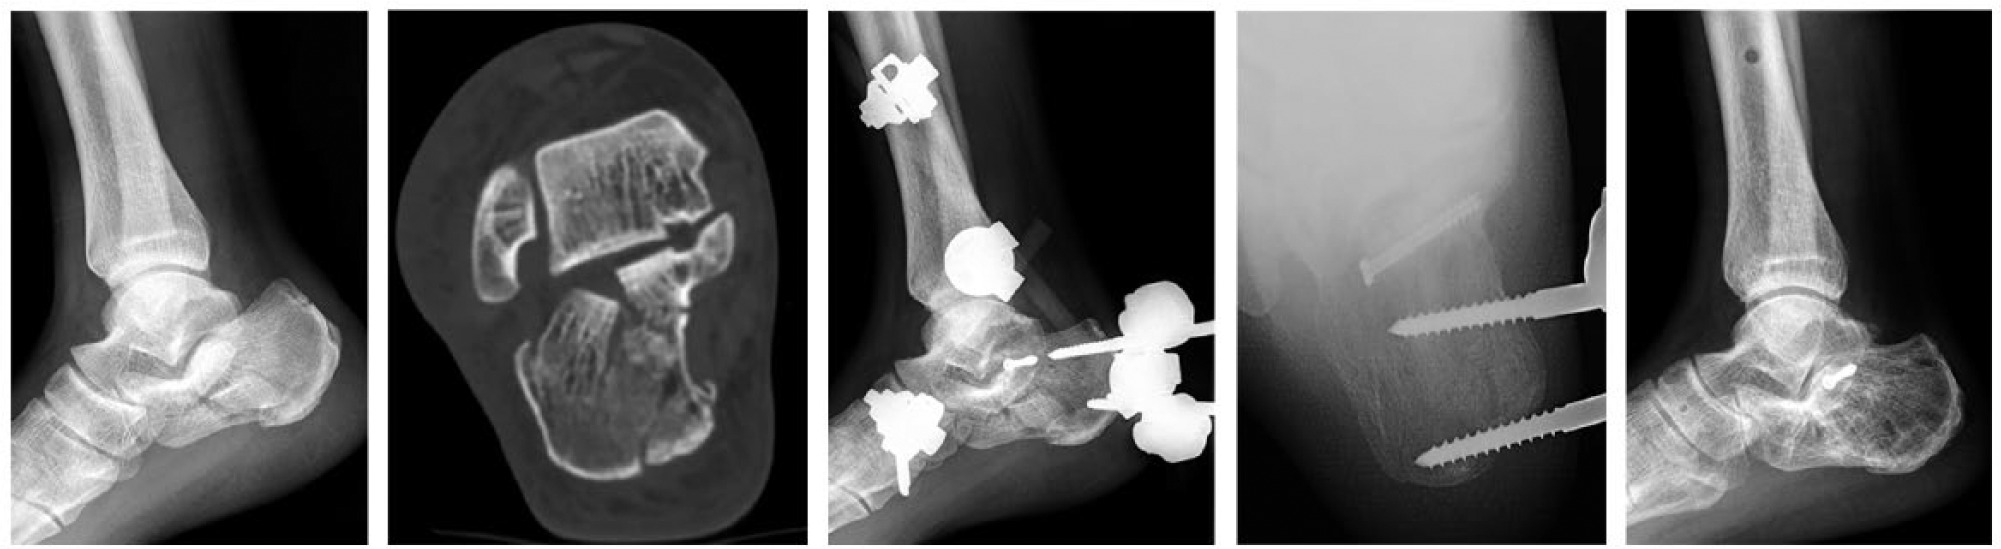 Fig. 6 
            A patient with Sanders type 2 calcaneal fractures treated with EFLIF. From left to right: a) pre-operatively in the lateral view; b) CT pre-operatively; one week post-operatively in the c) lateral and d) axial view; and e) one year post-operatively in the lateral view.
          